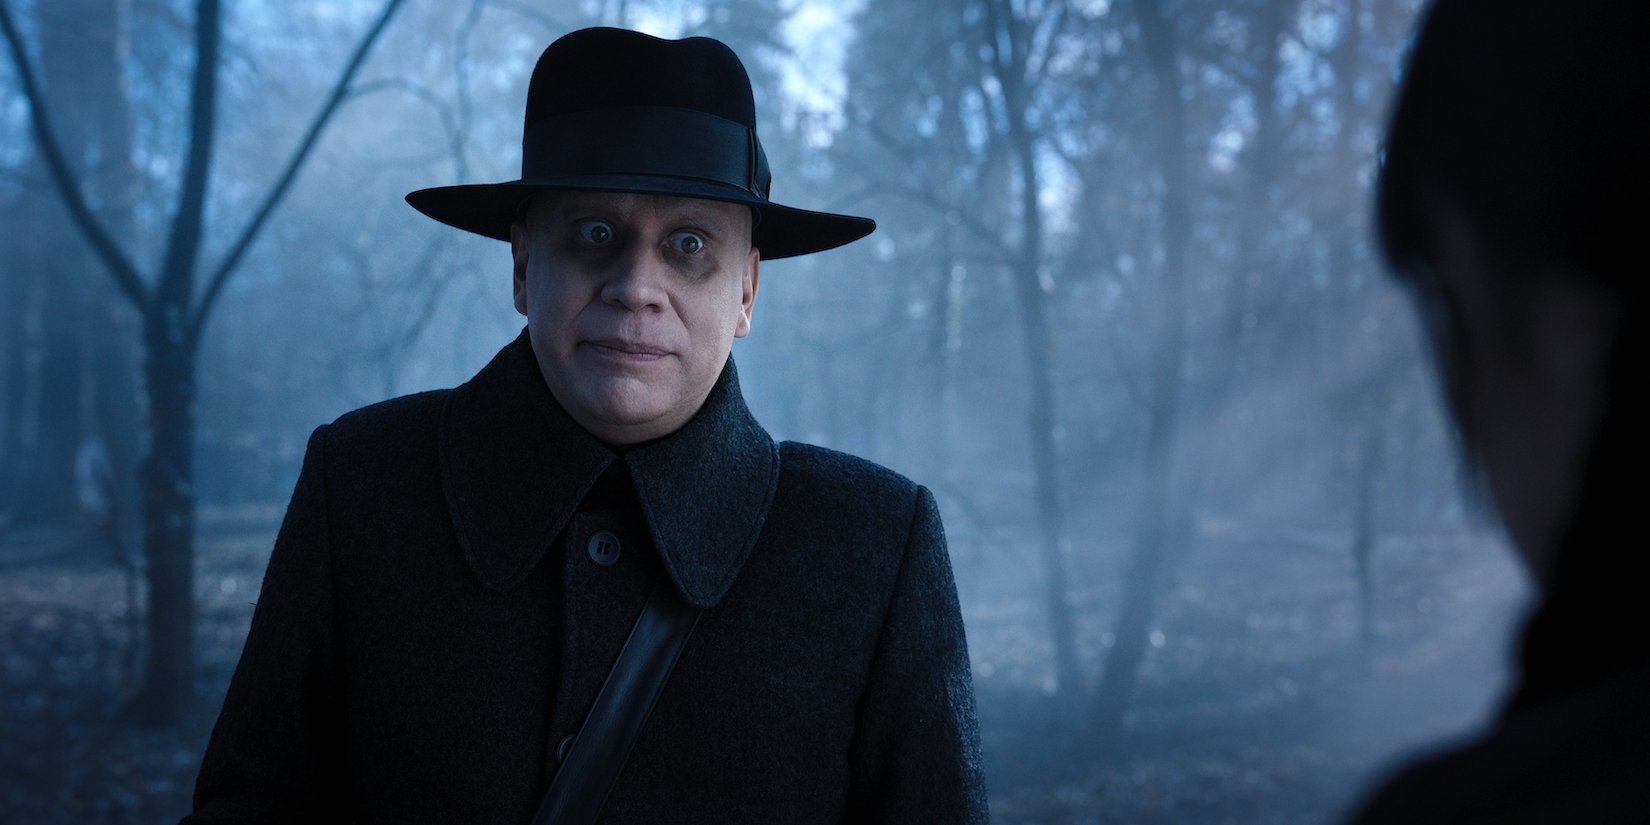 Uncle Fester (Fred Armisen) in the upcoming Netflix series 'Wednesday' from Tim Burton